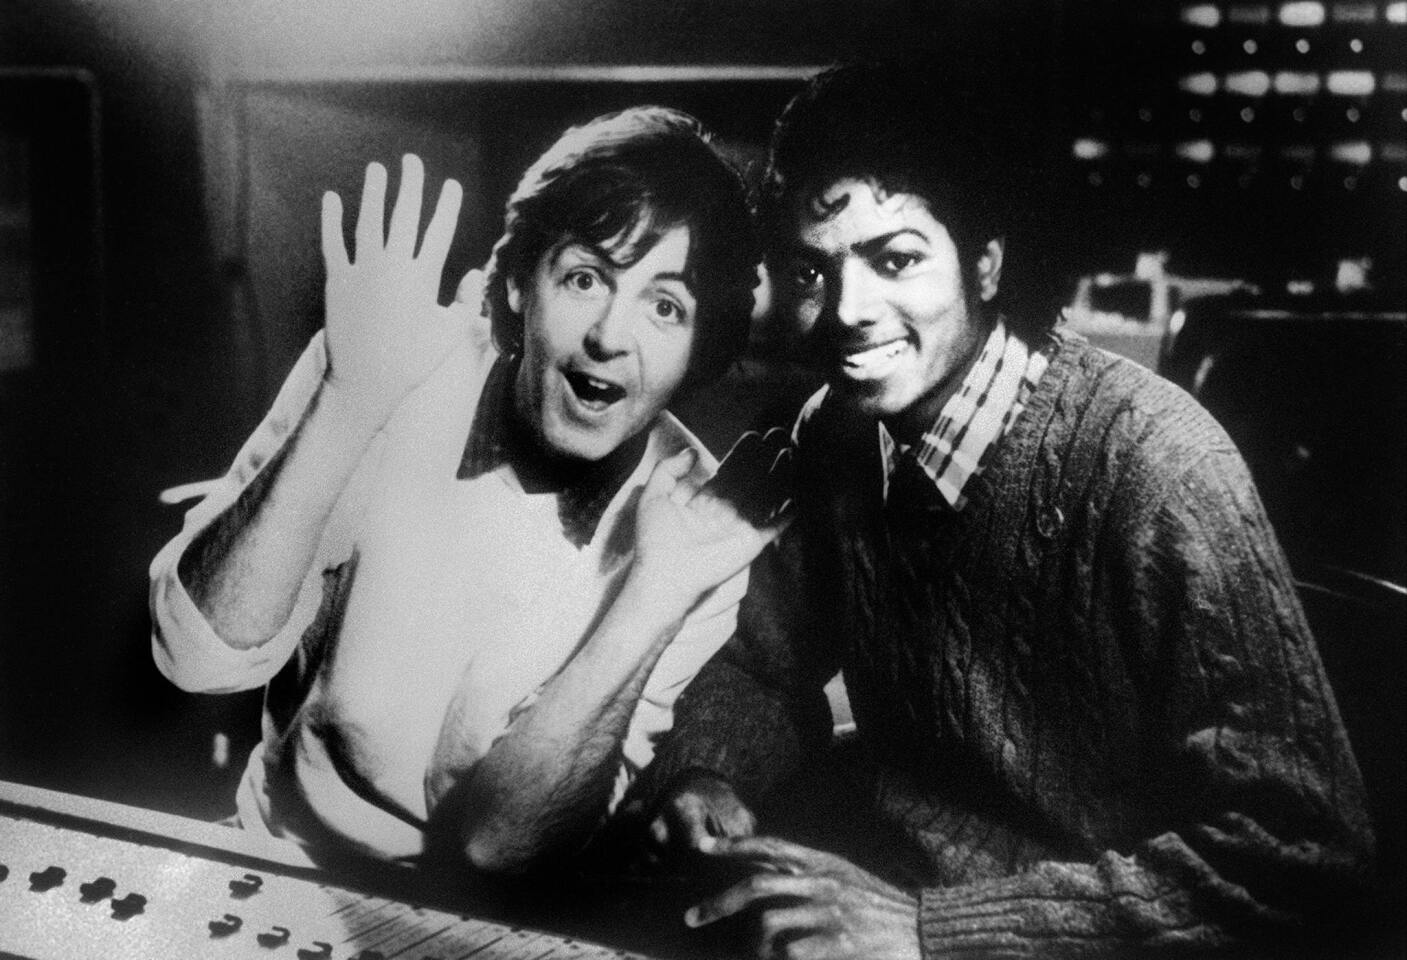 Paul McCartney: Life in pictures